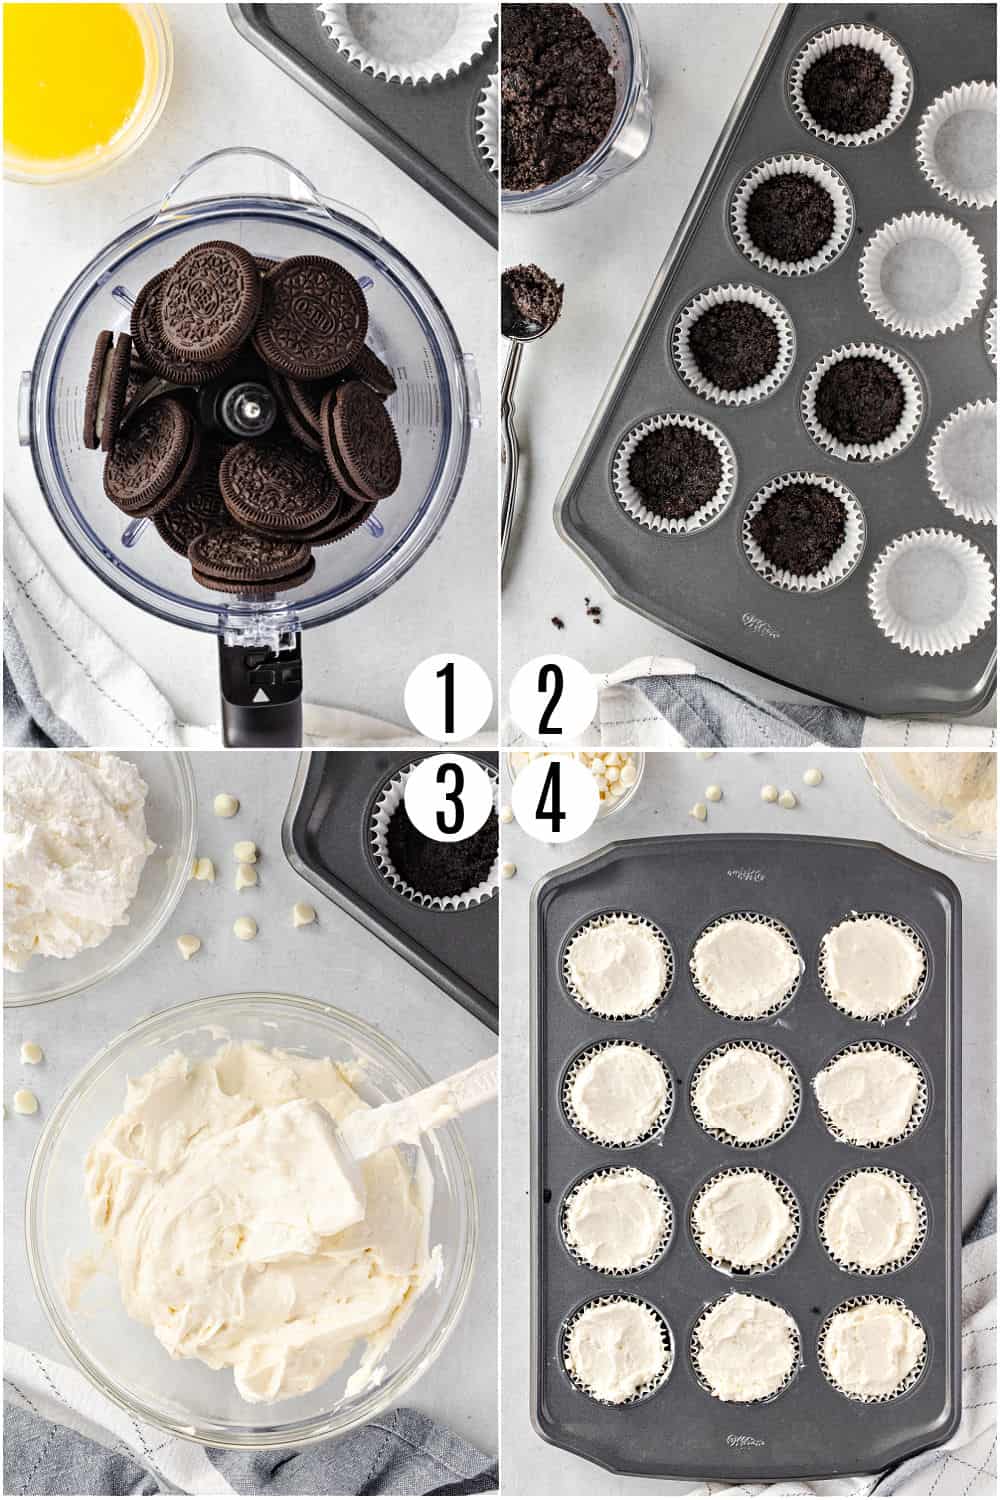 Step by step photos showing how to make no bake cheesecake in muffin tin.